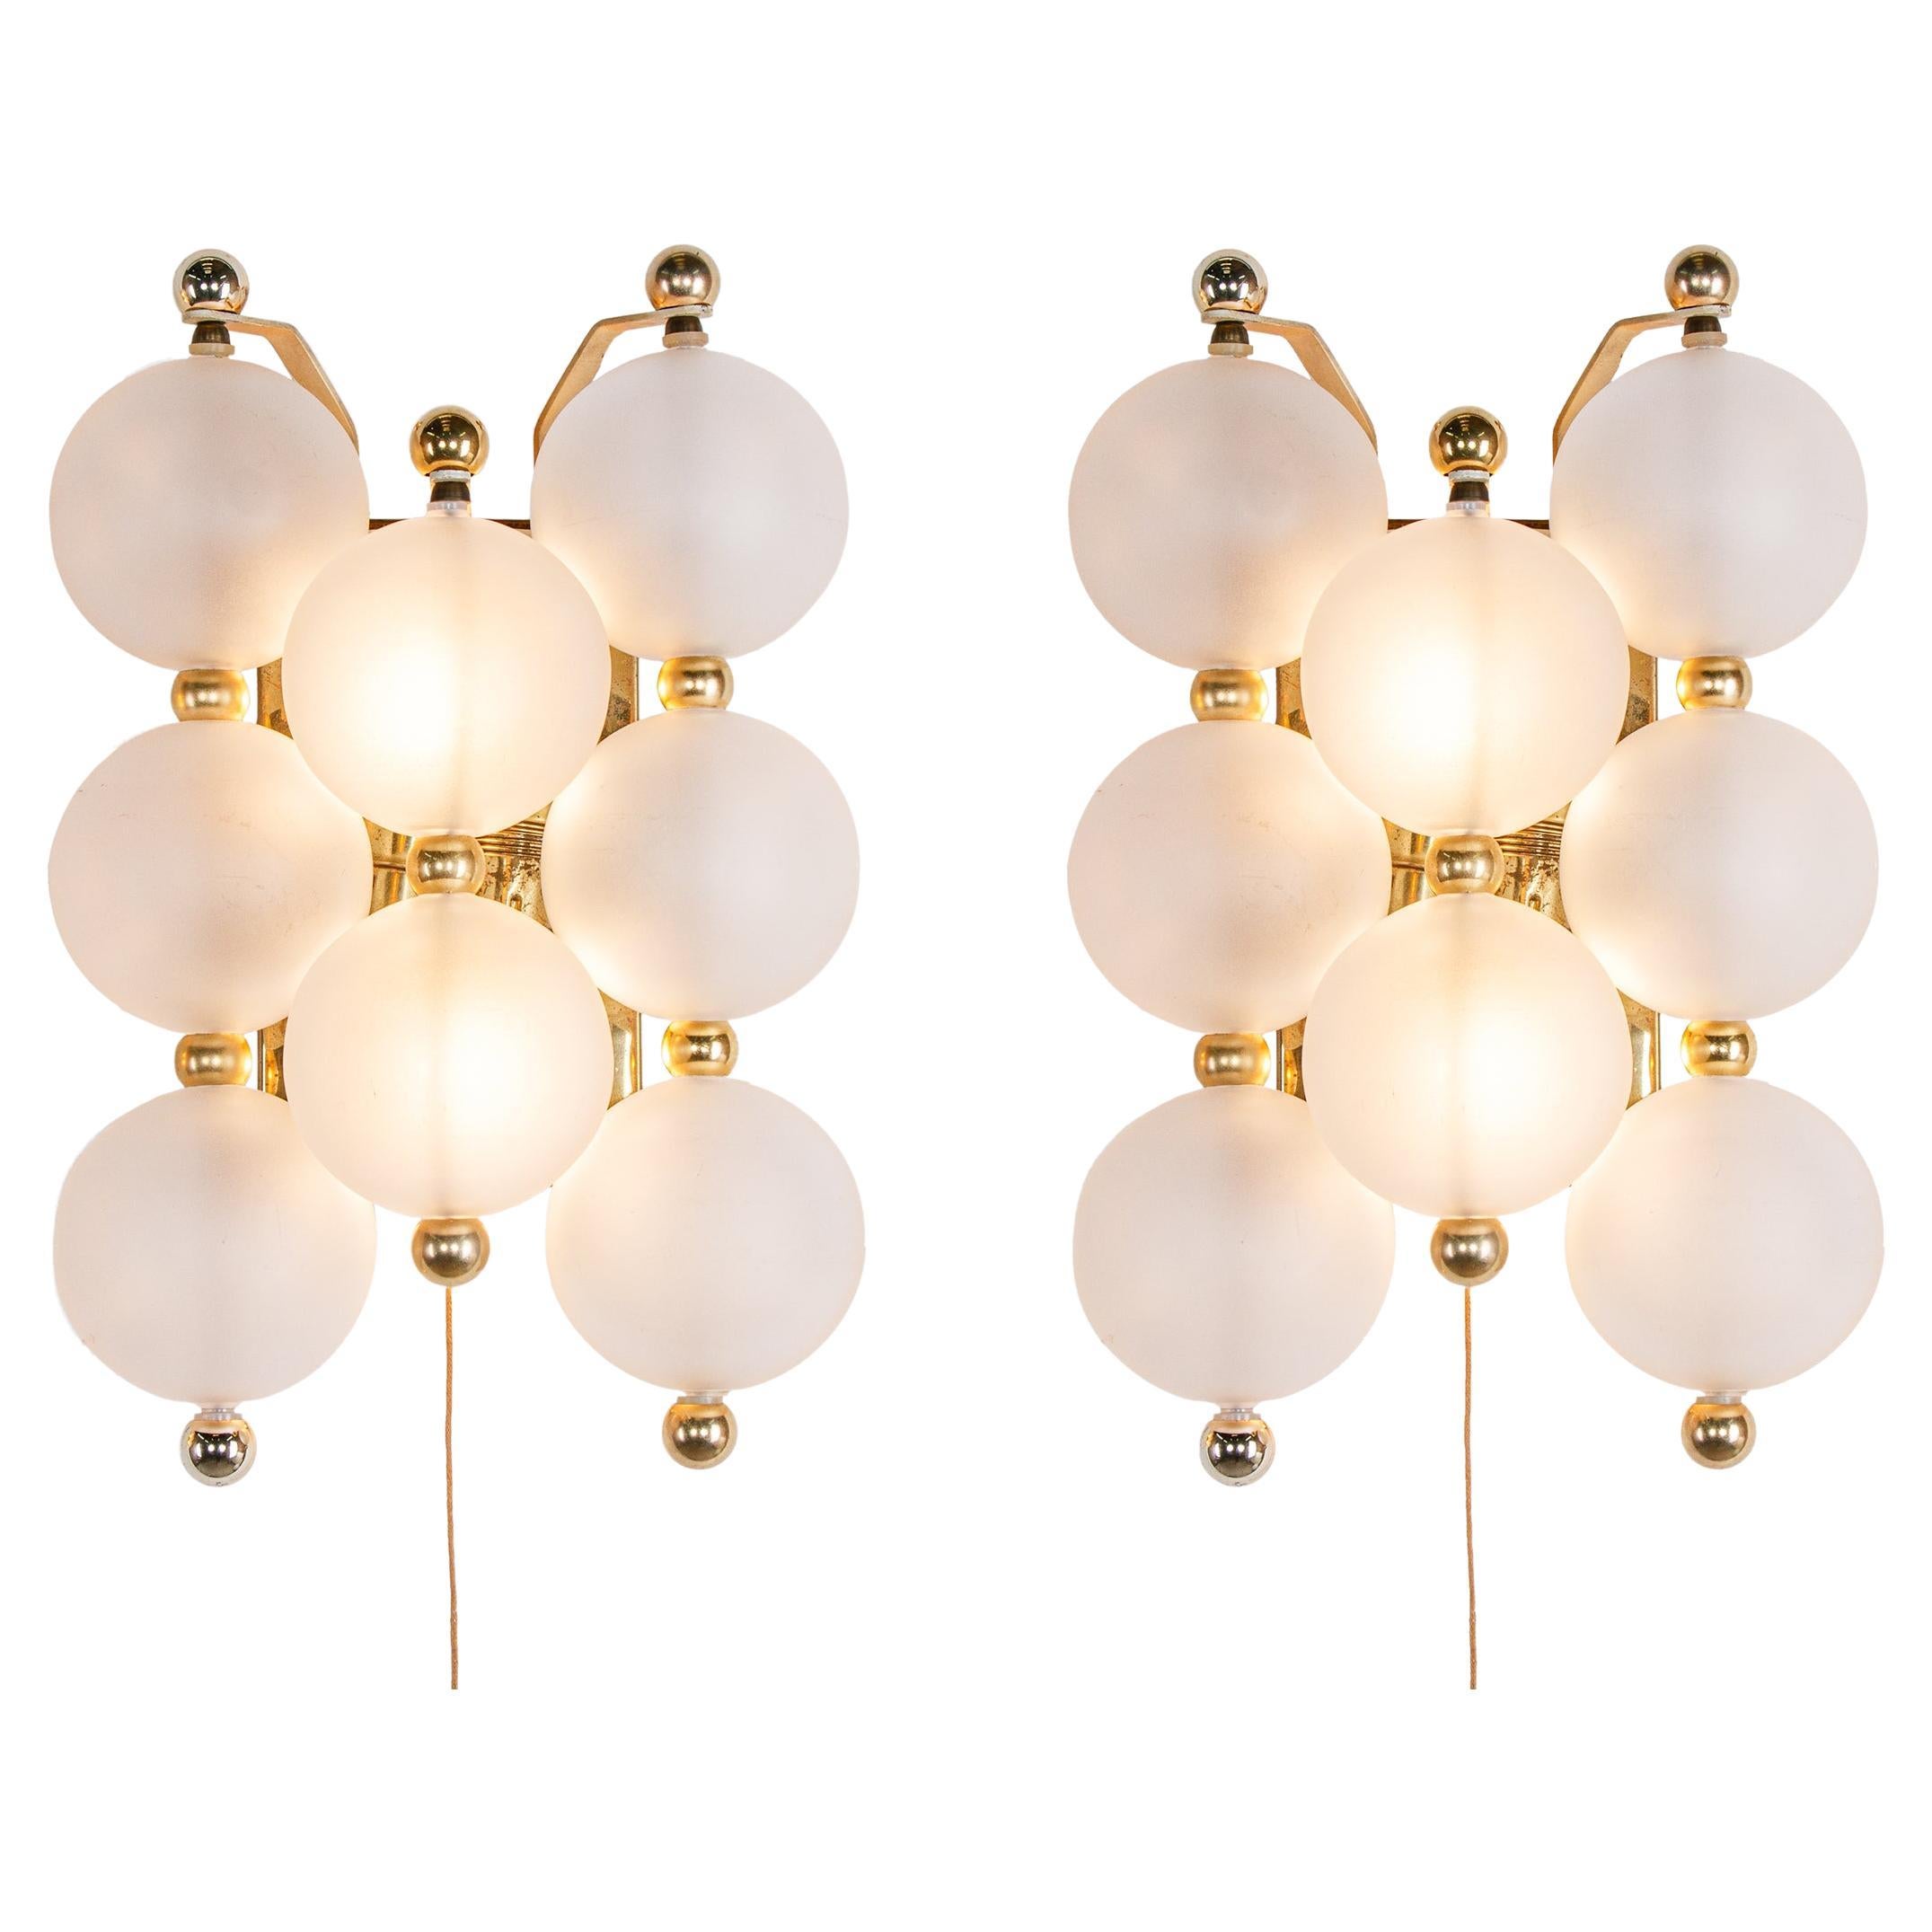 Pair of Kinkeldey Wall Sconces Frosted Glass Balls & Brass, Germany 1960s For Sale